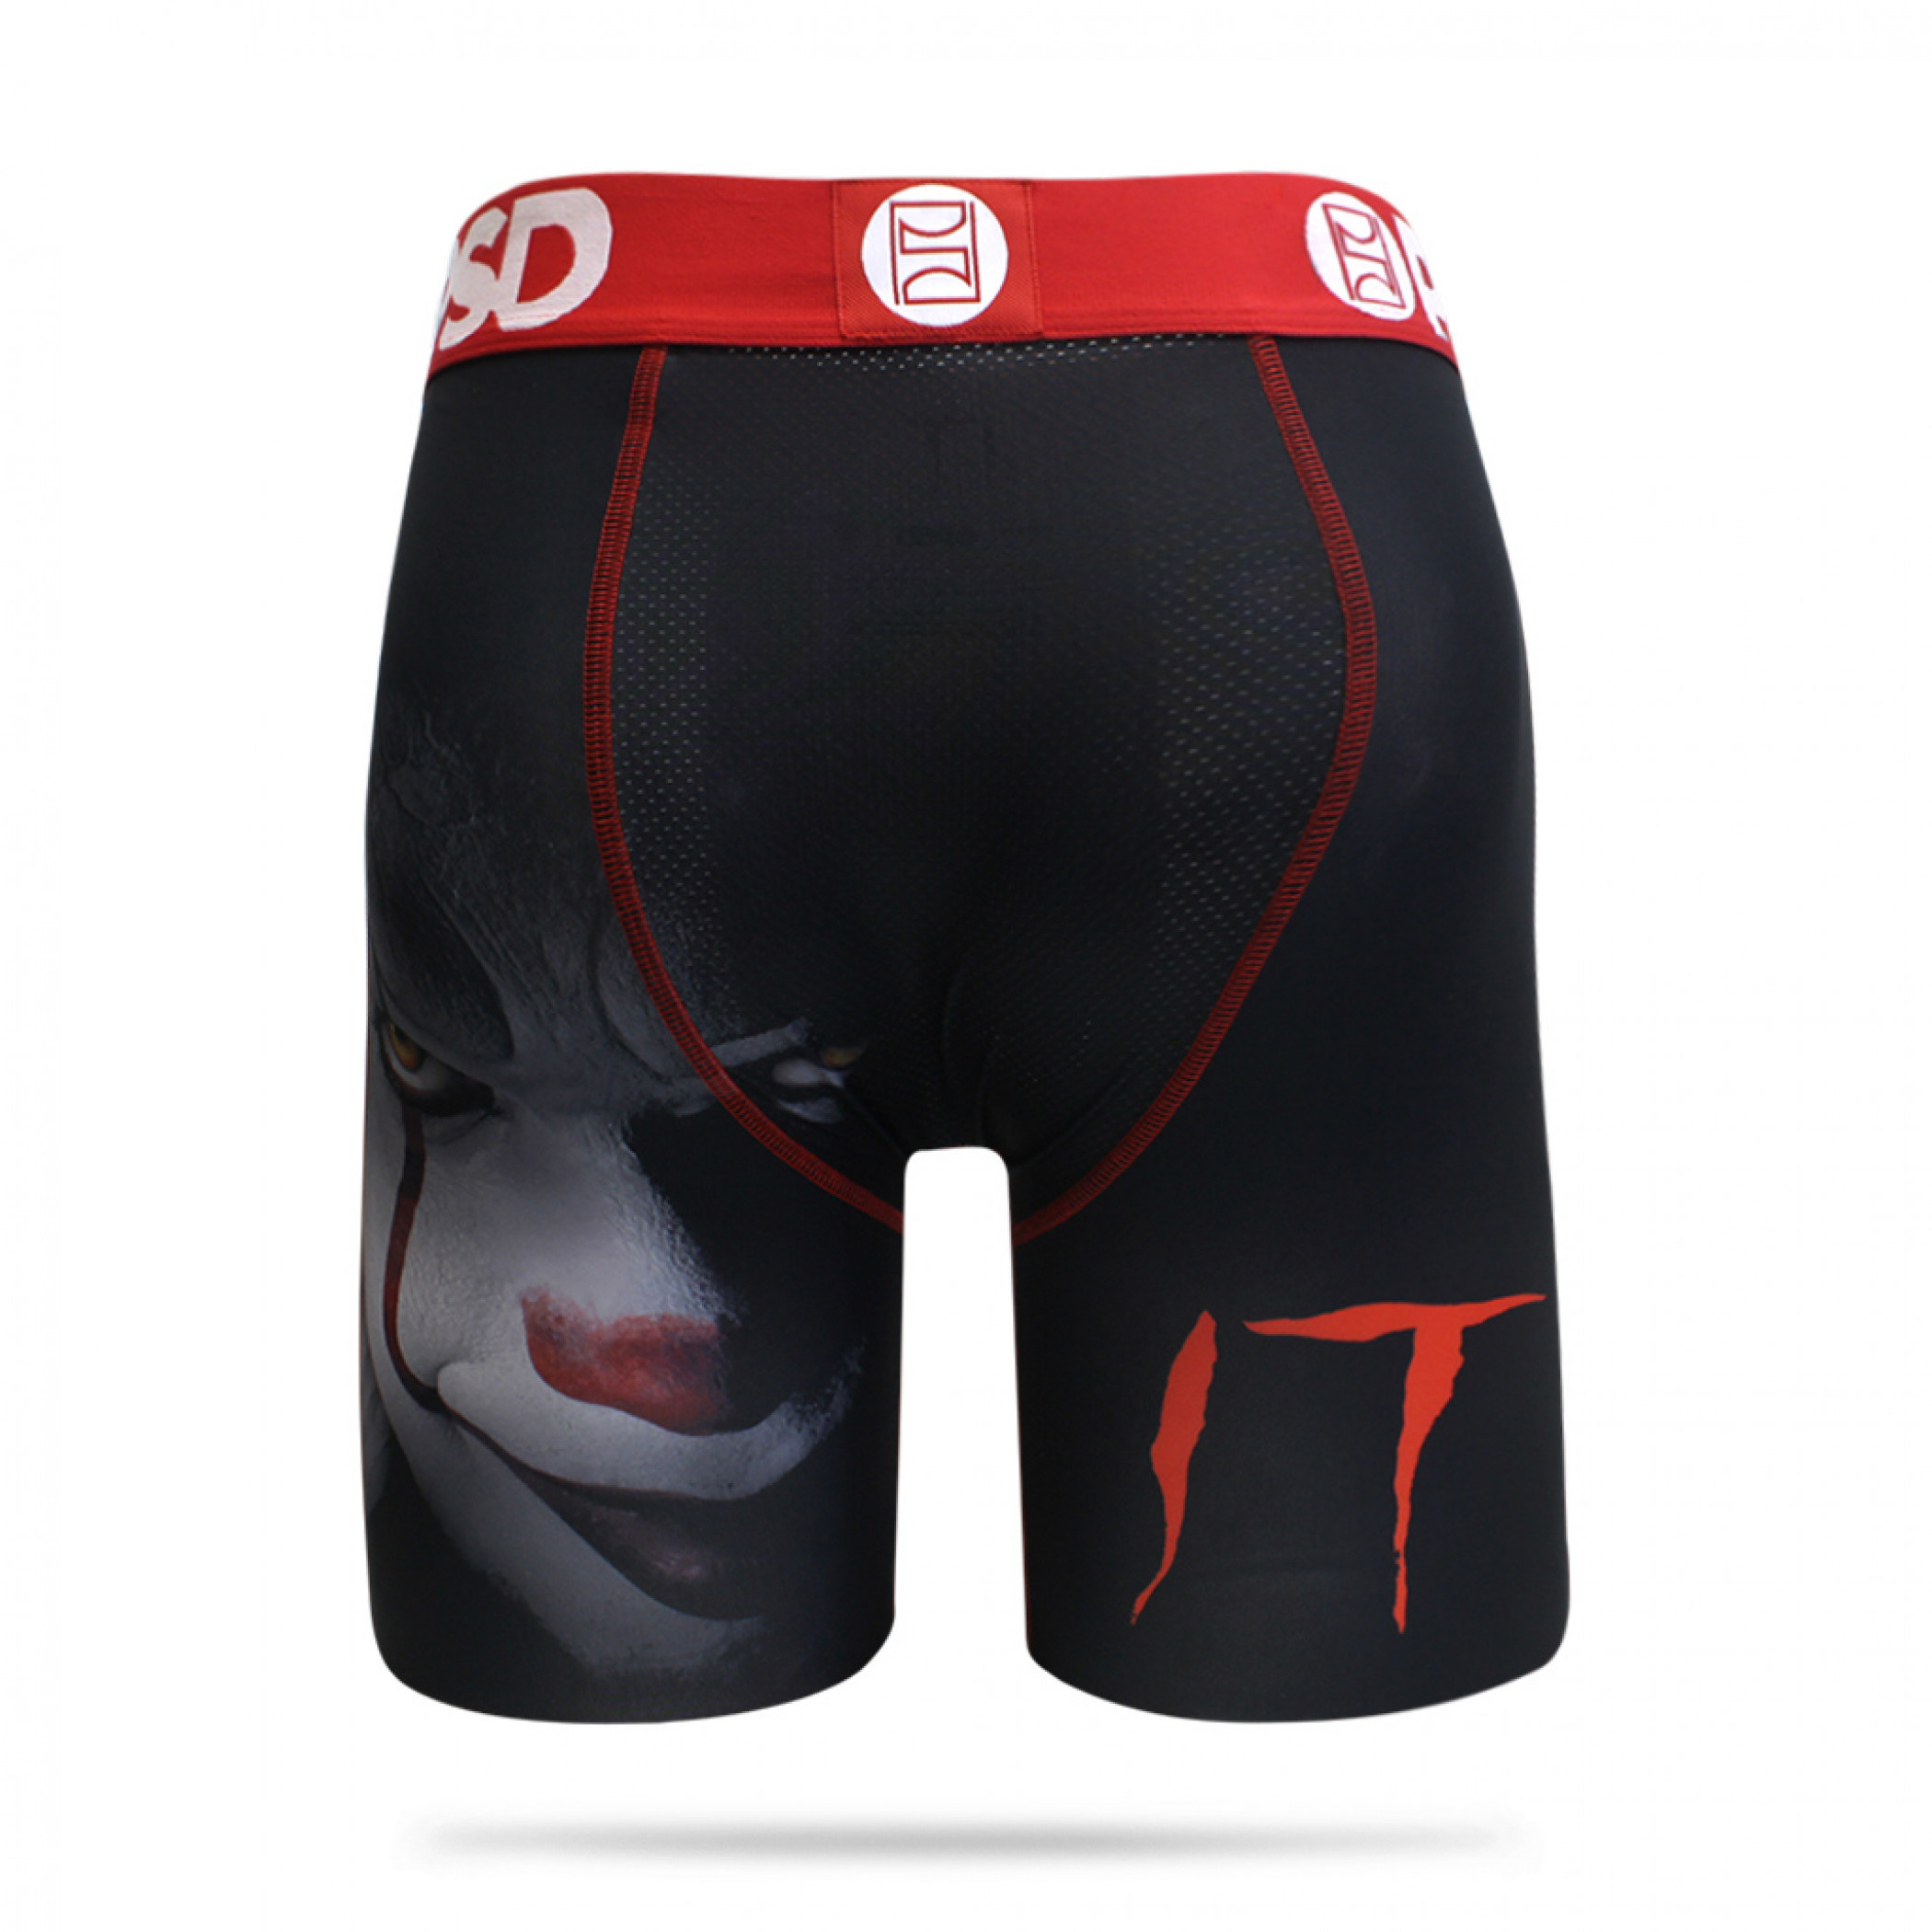 IT Pennywise the Clown PSD Boxers Briefs